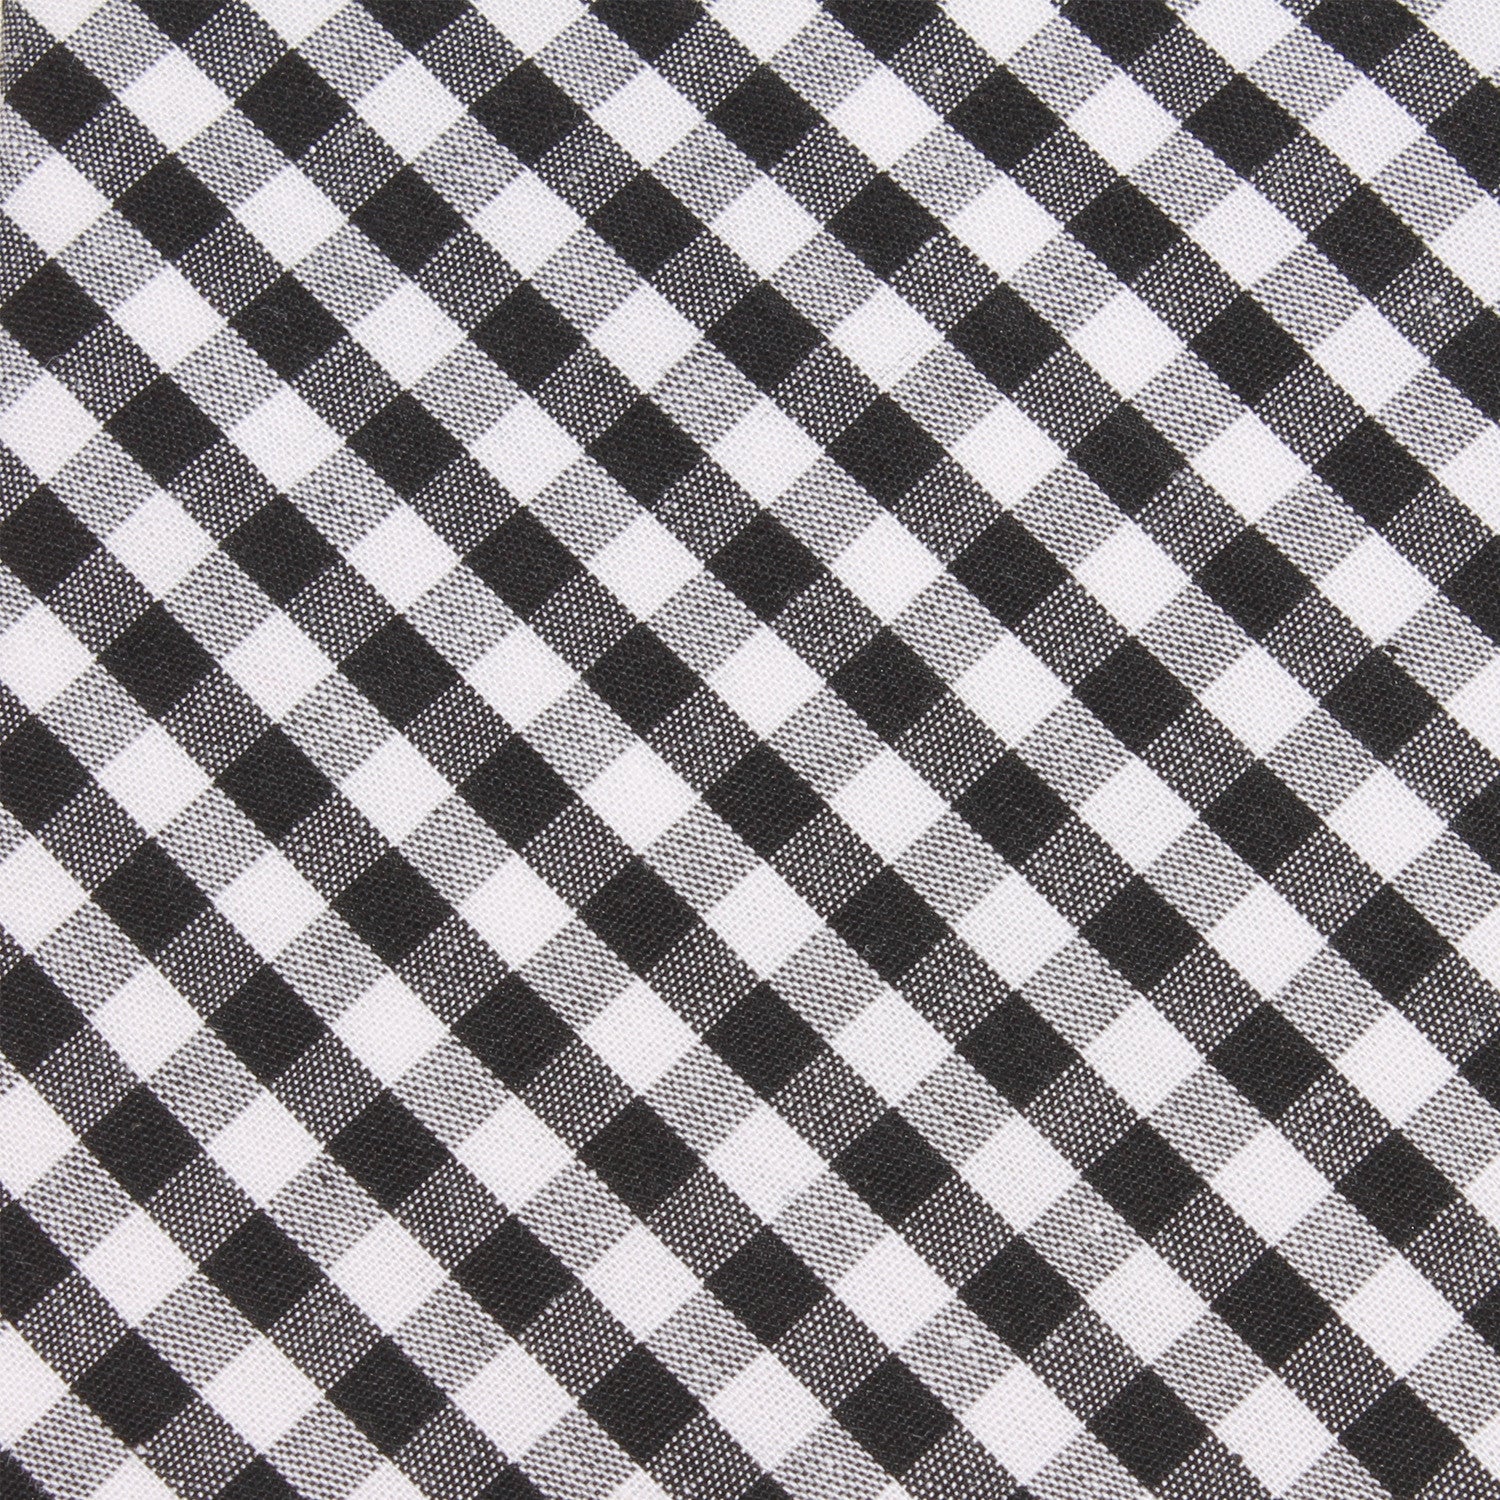 Black and White Gingham Cotton Fabric Skinny Tie C024